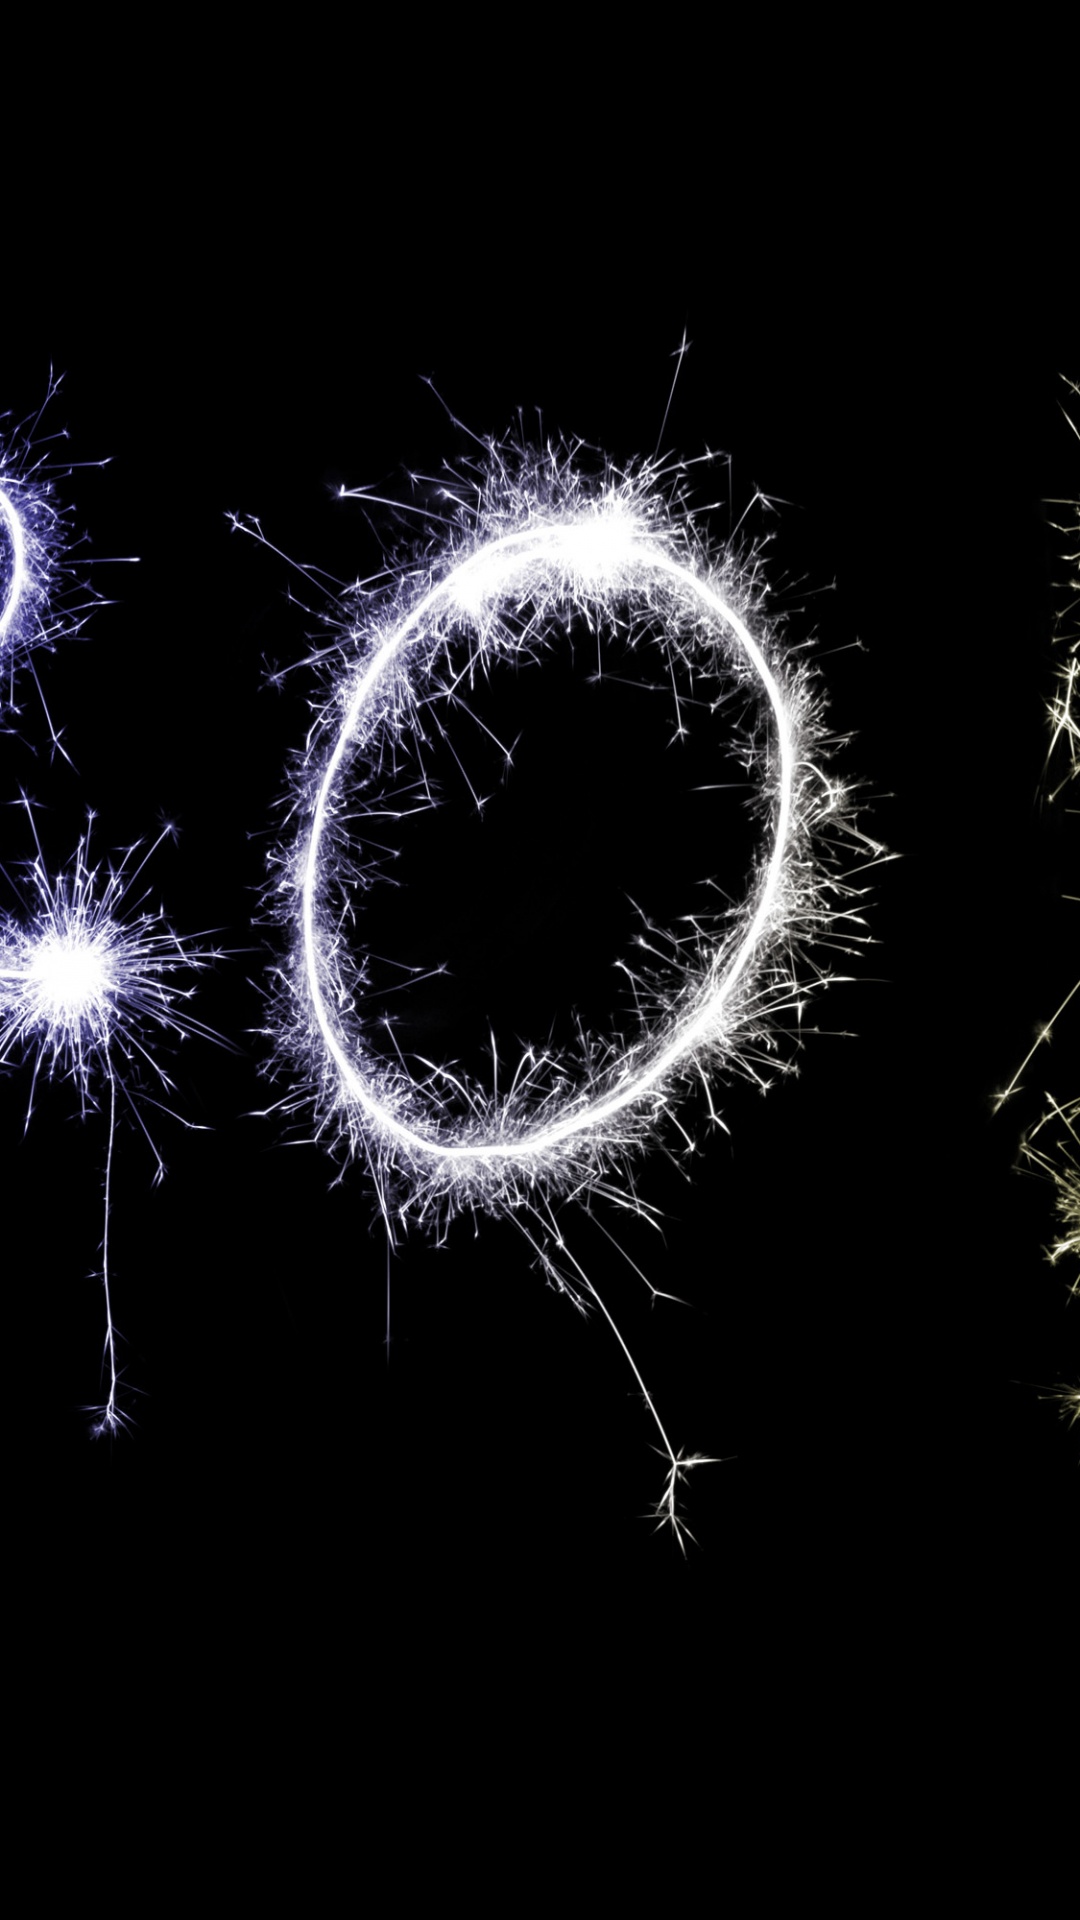 New Years Eve, New Year, Fireworks, Sparkler, Darkness. Wallpaper in 1080x1920 Resolution